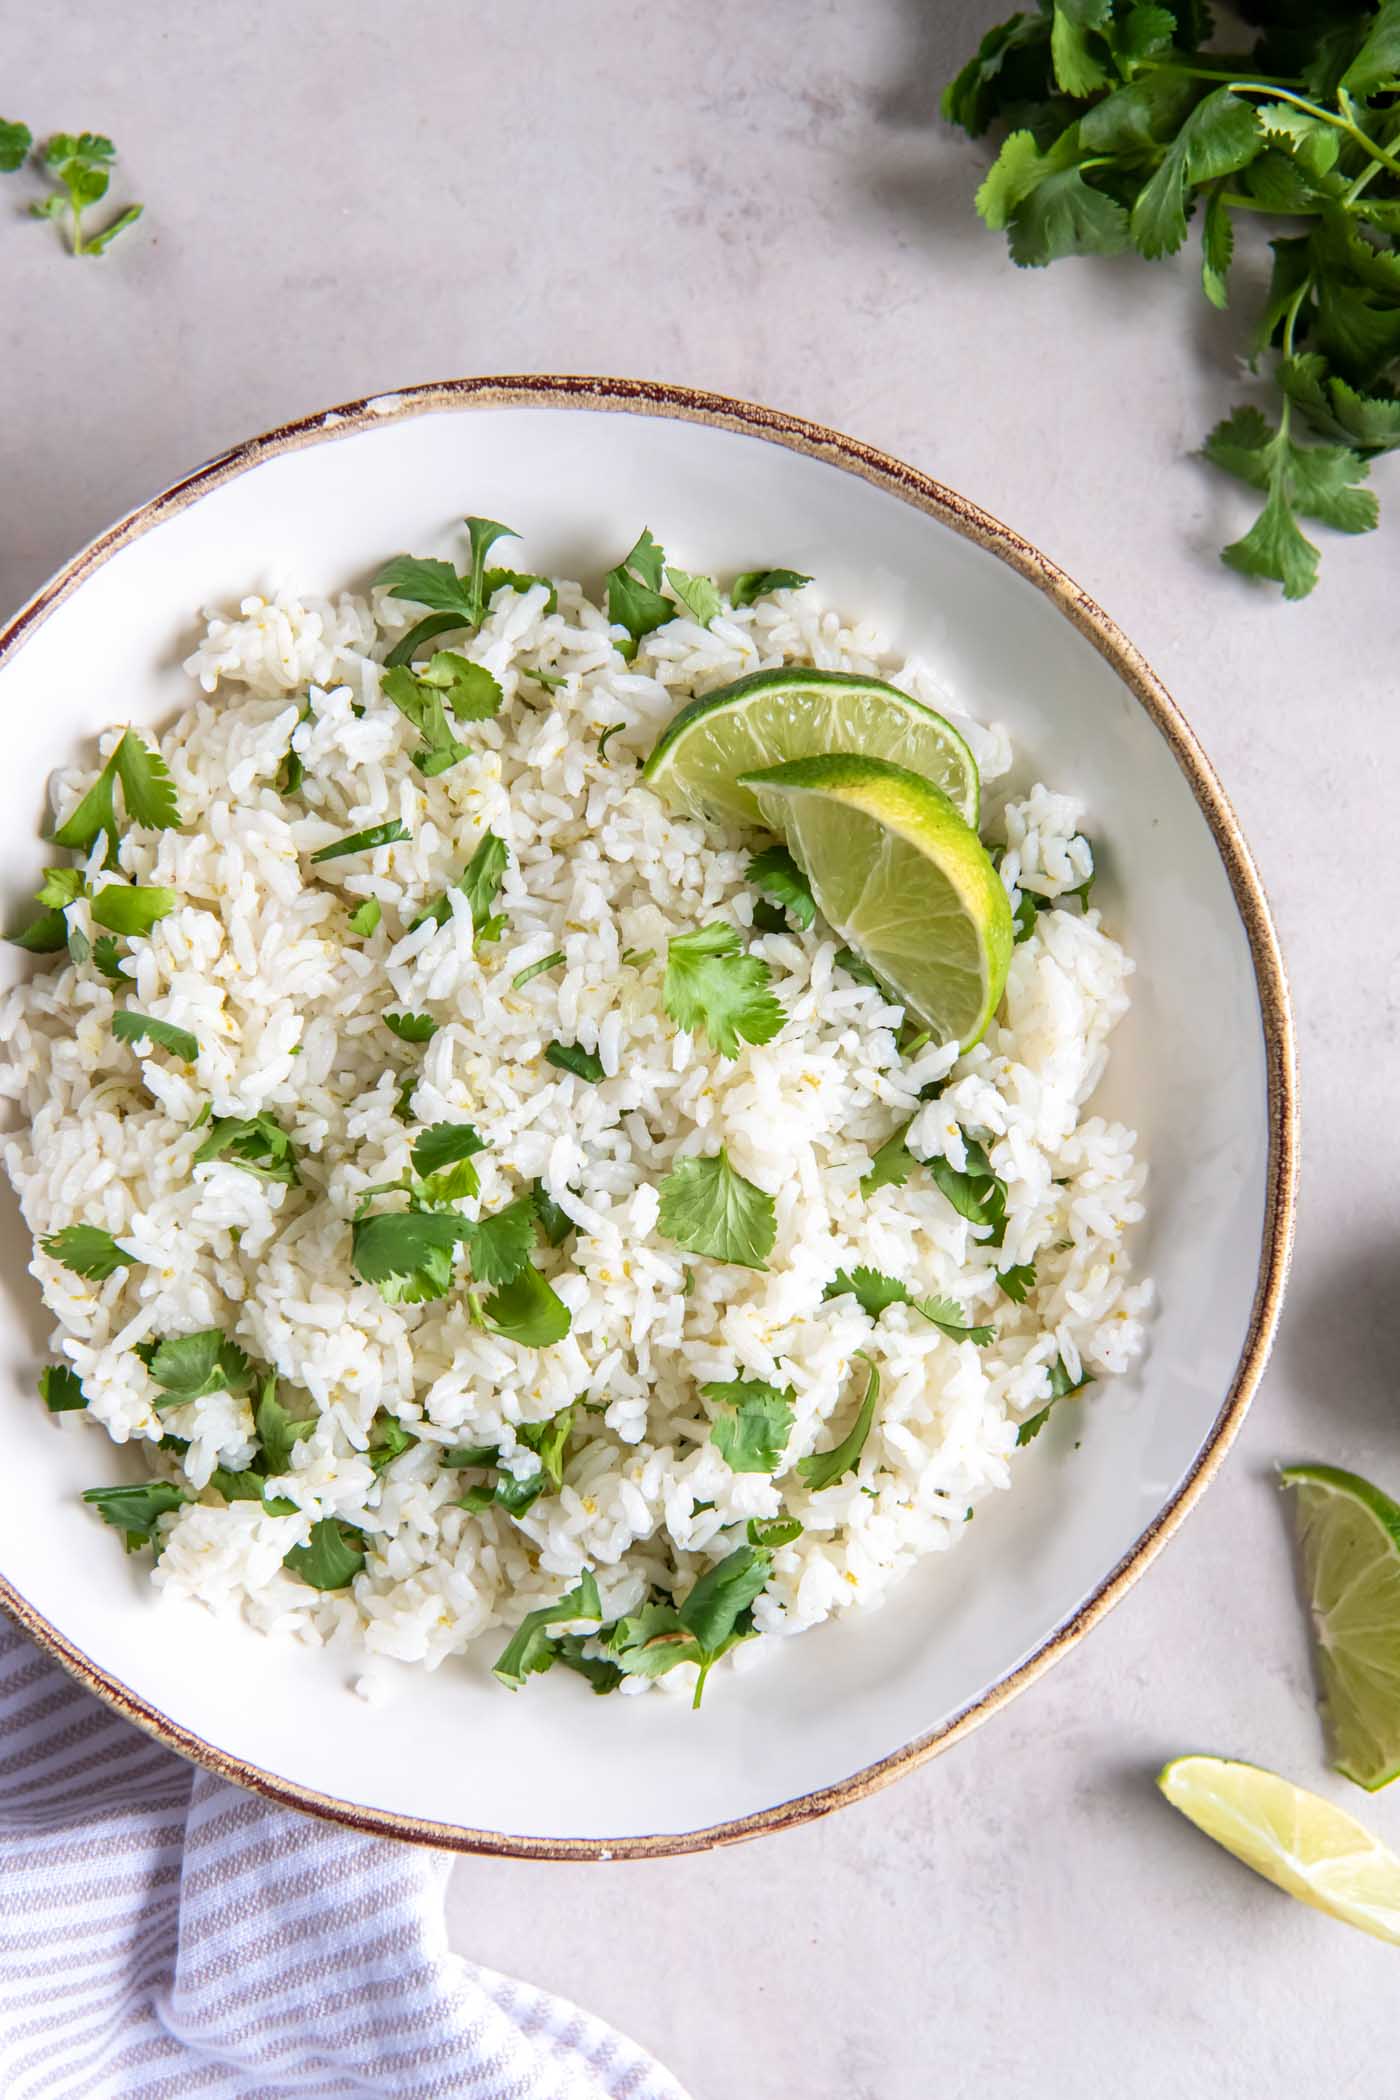 Cilantro lime rice in serving bowl garnished with lime wedges.